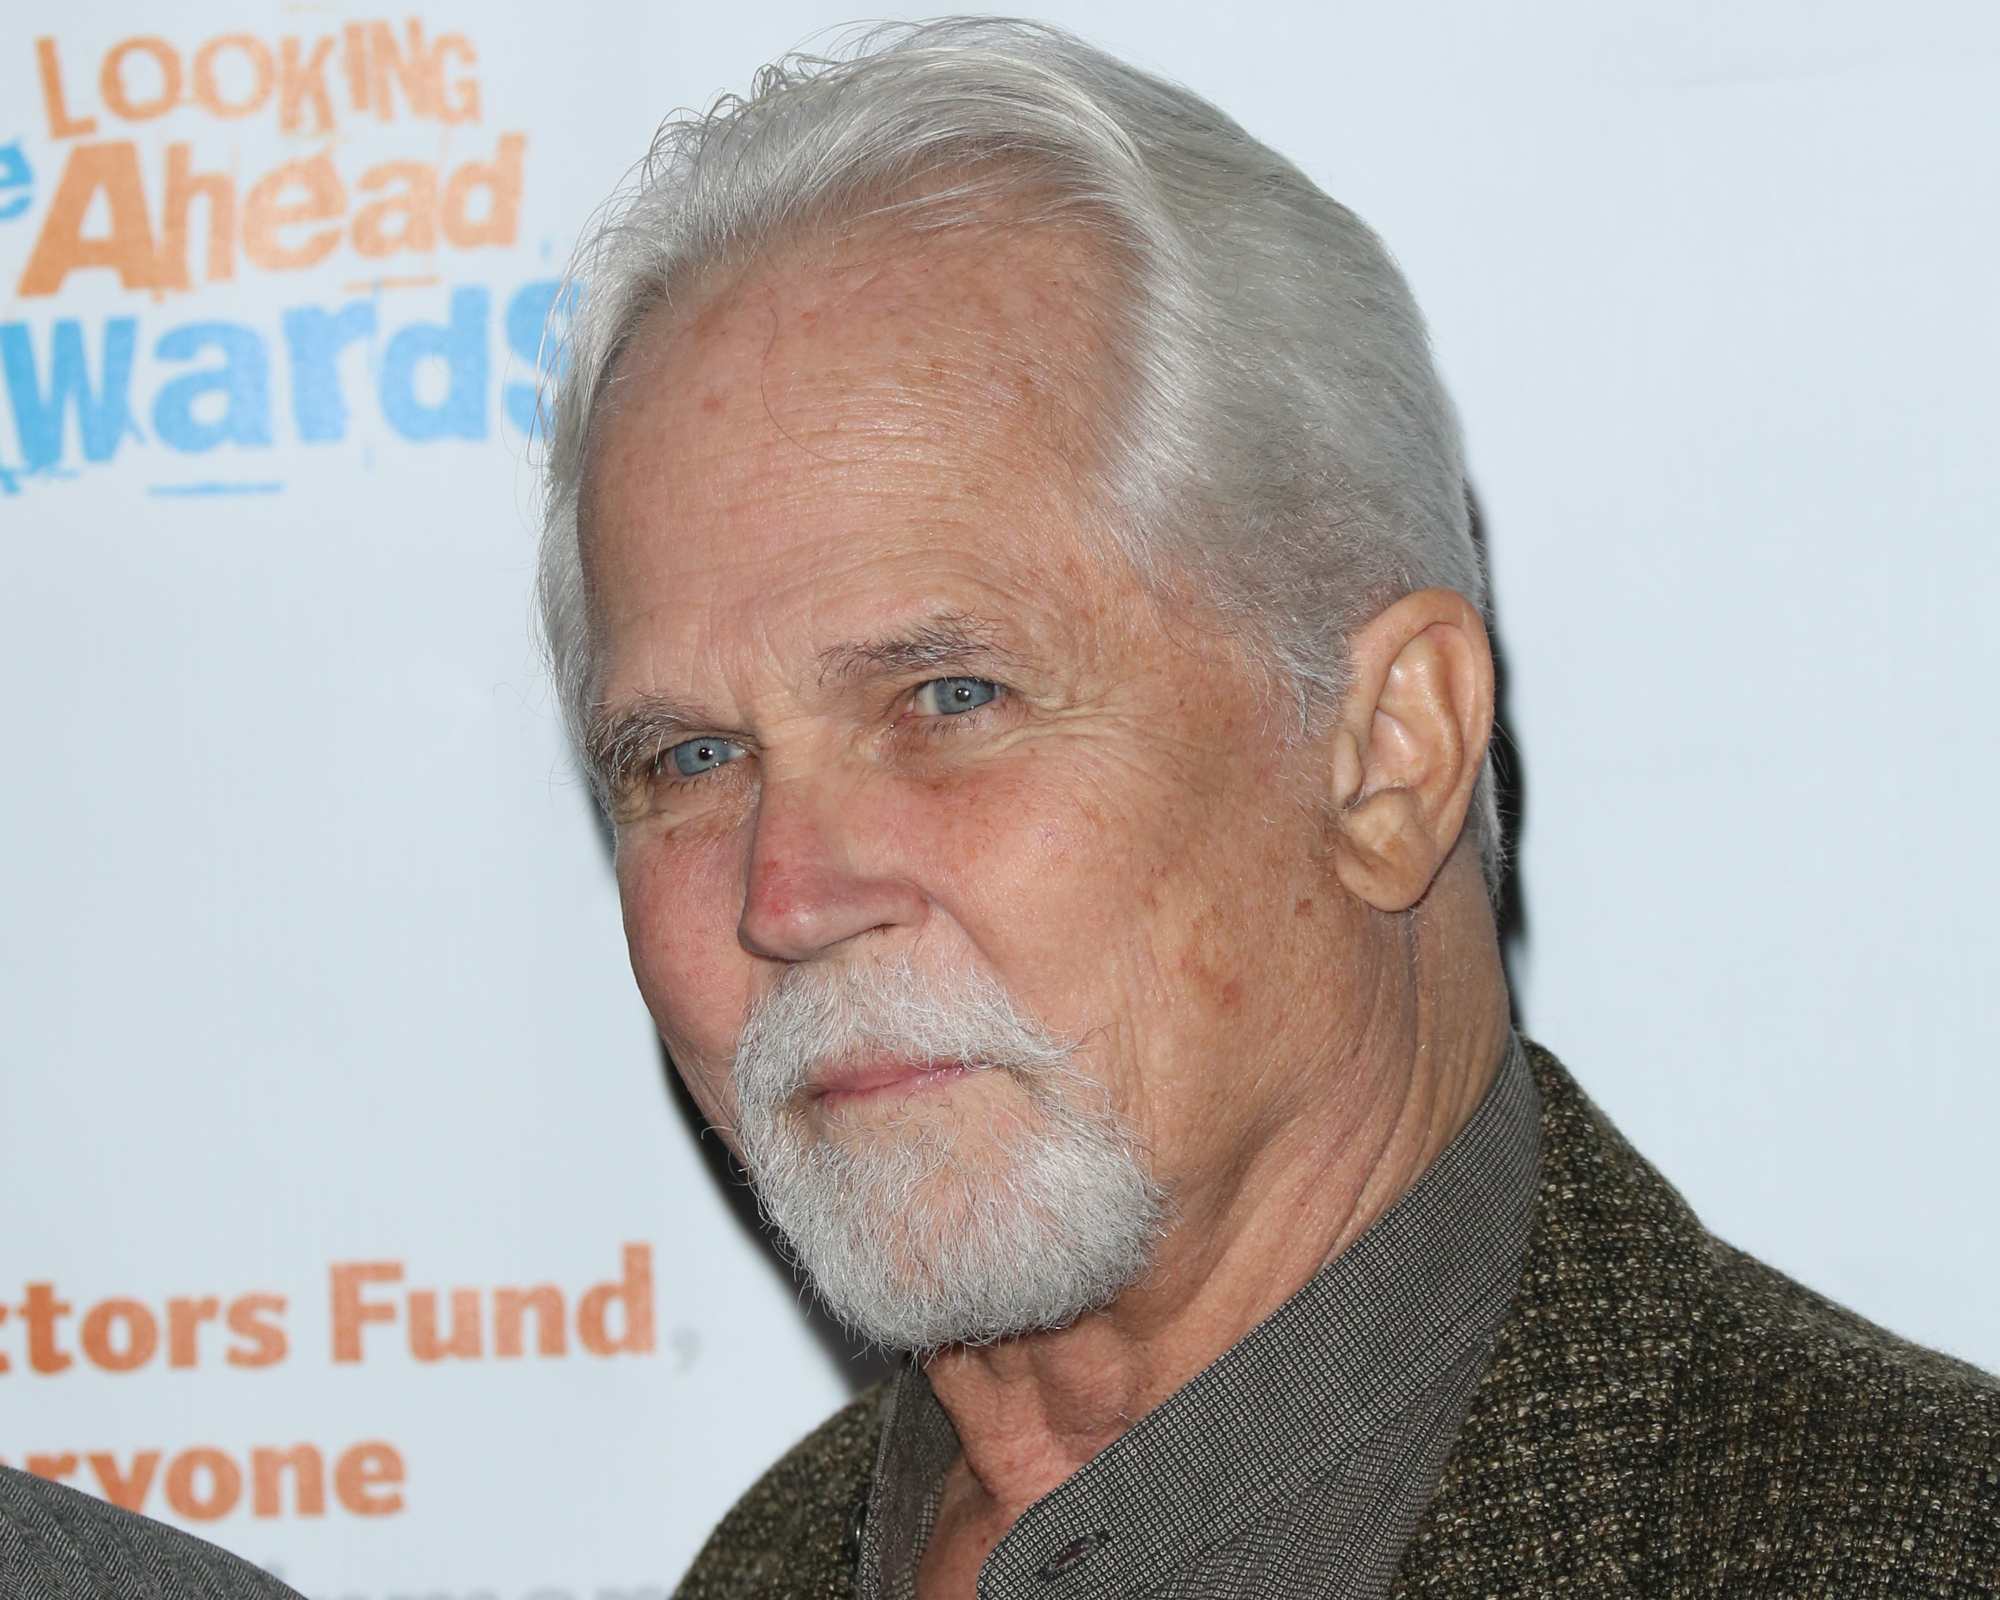 'Leave It to Beaver' actor Tony Dow, who has been declared dead at age 77. In the photo, he's smiling and wearing a dark green shirt and jacket.